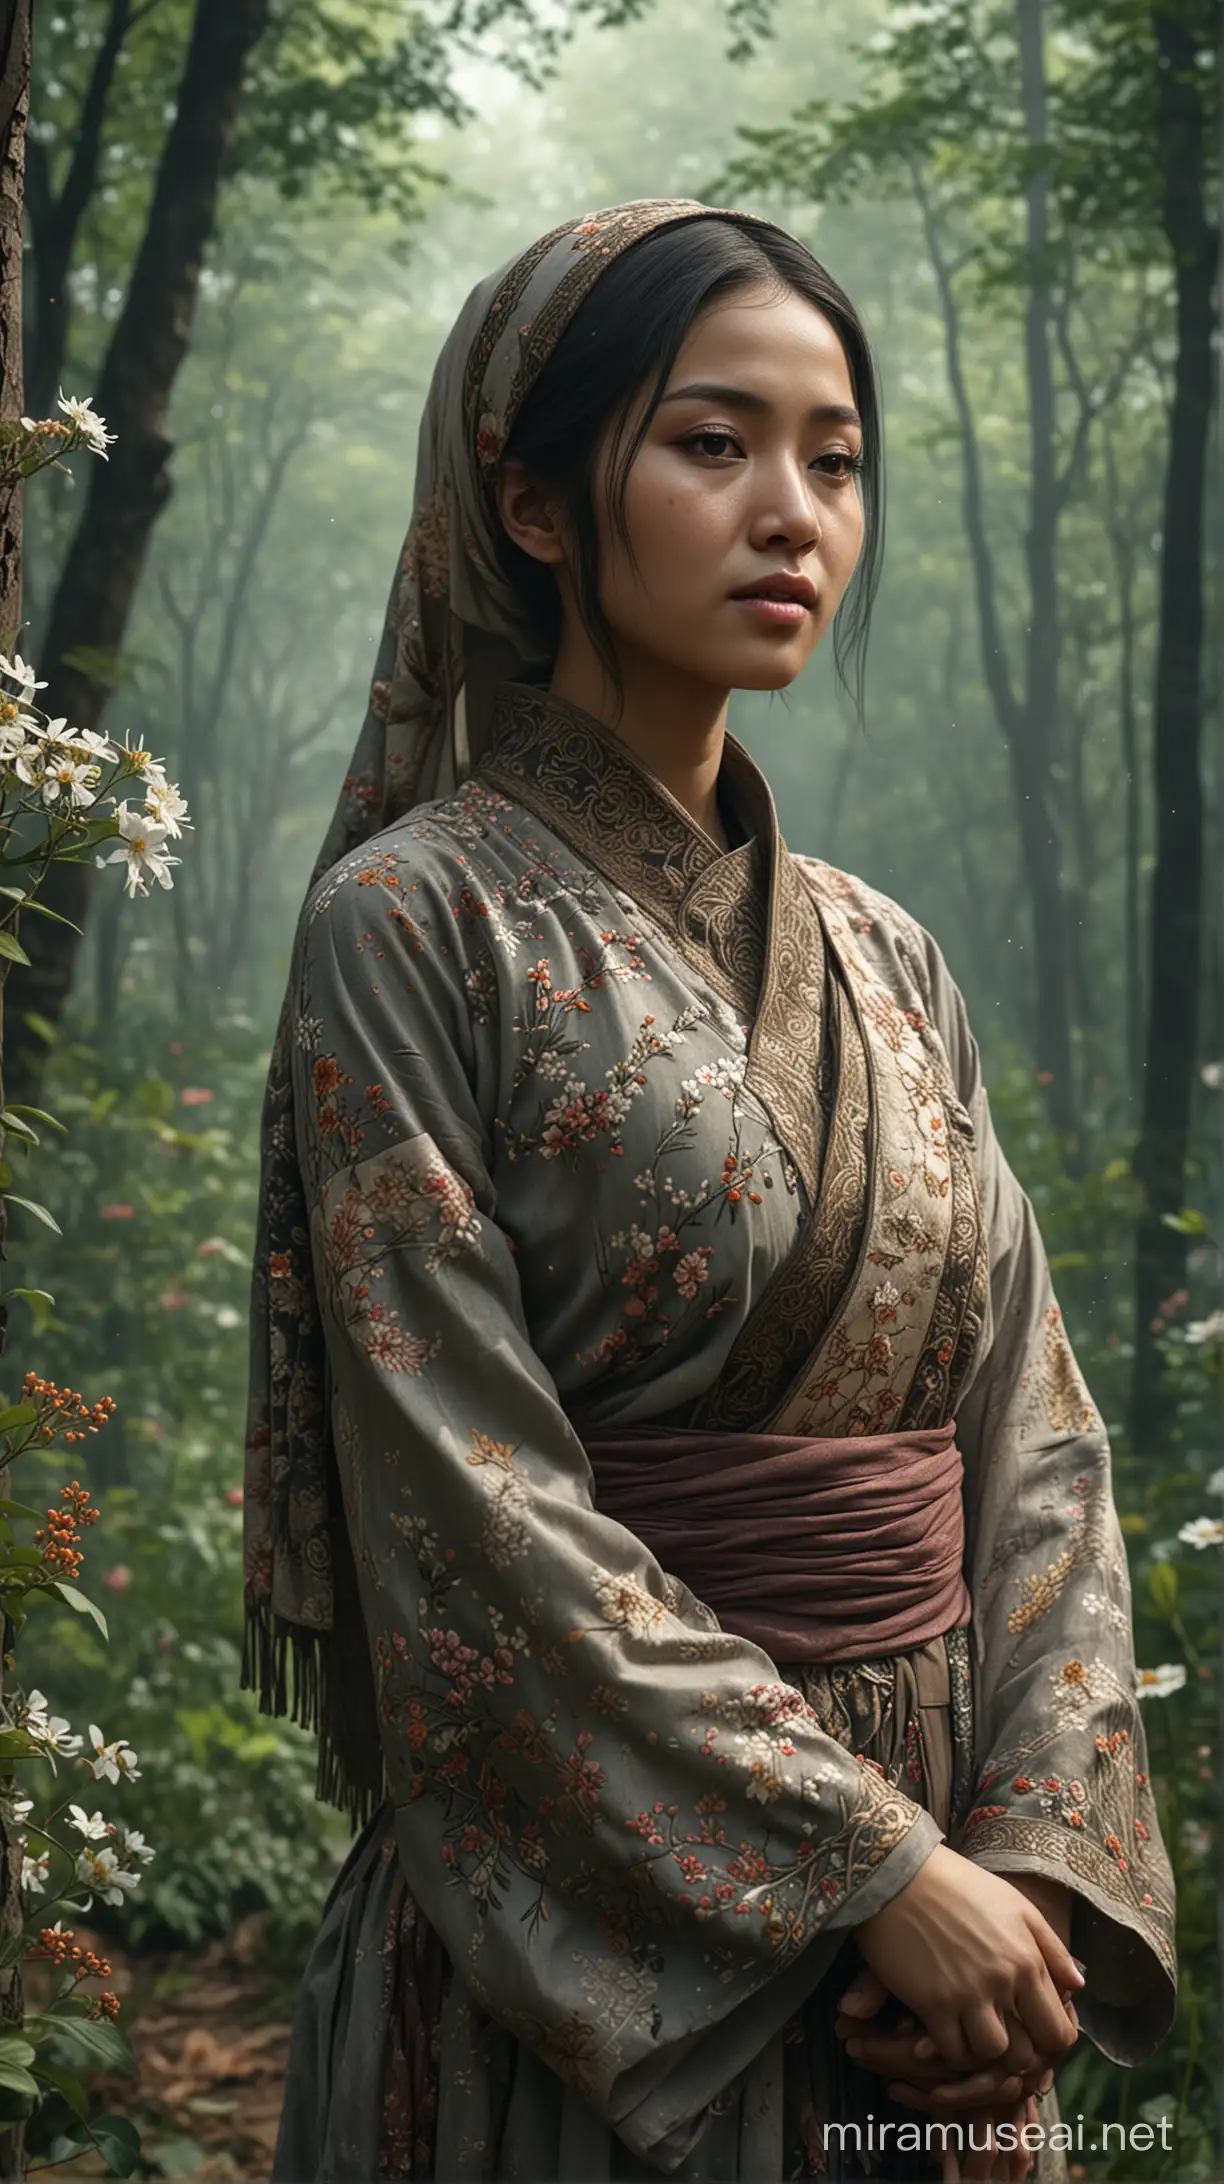 Beautiful Indonesian Girl in Decaying Hanfu Clothes Lost in Wild Forest